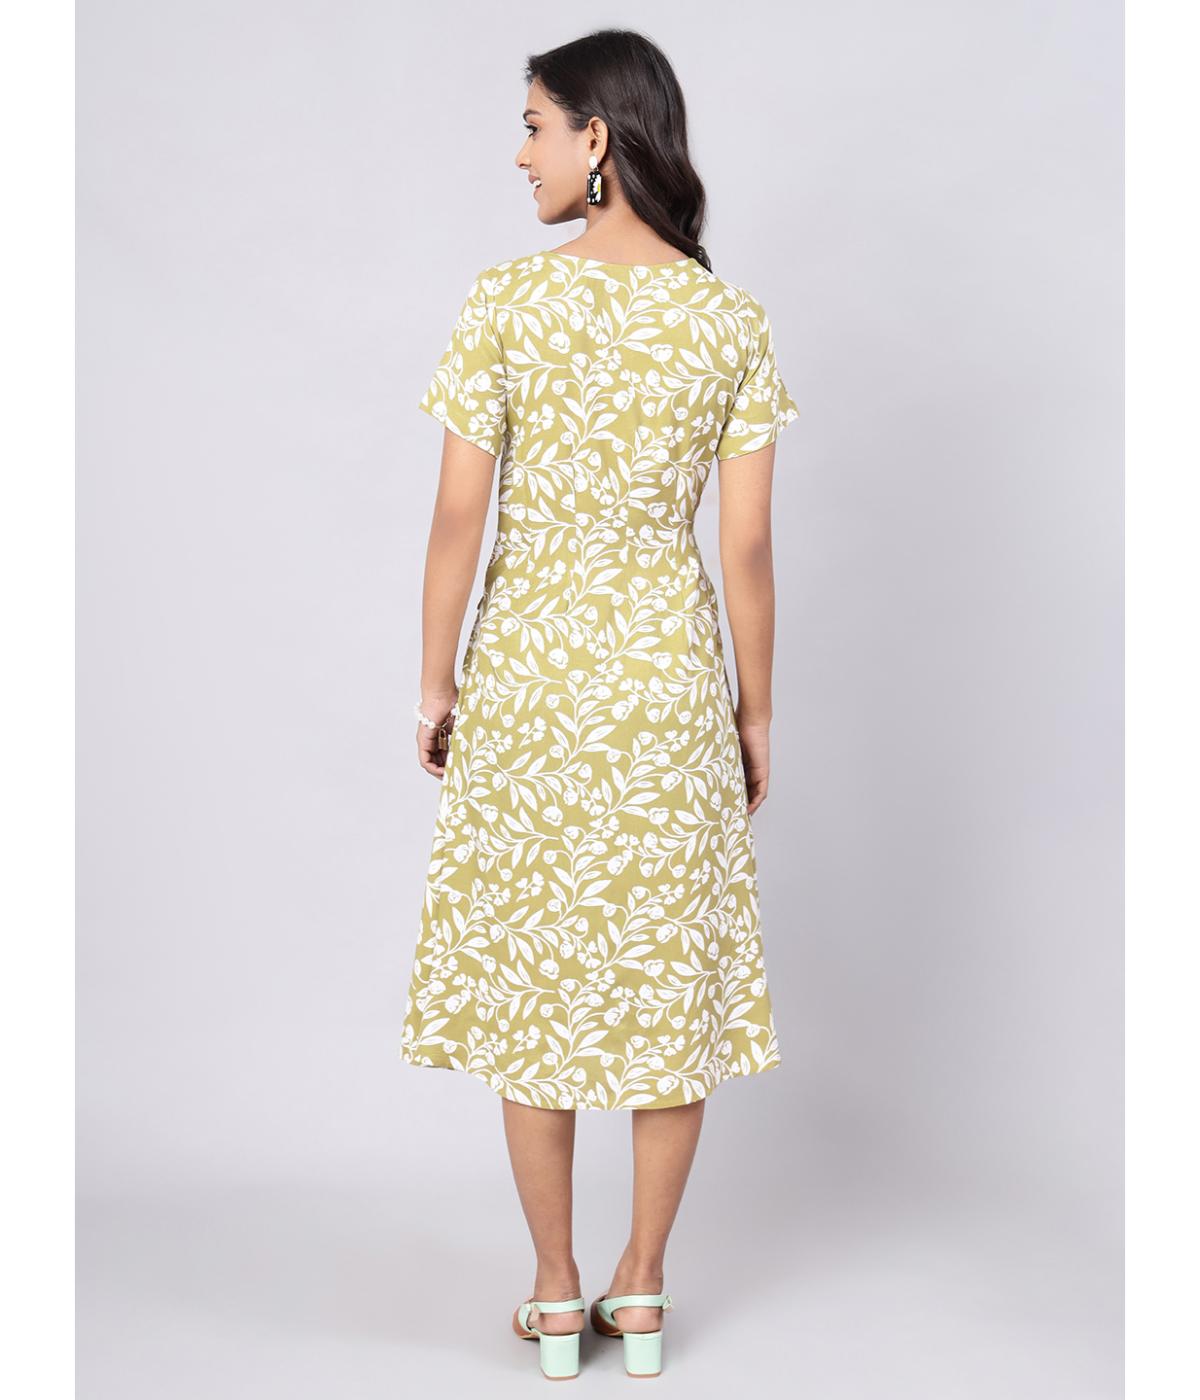 Daevish New Rayon Leaf Printed A-line Dress for Women & Girl's 